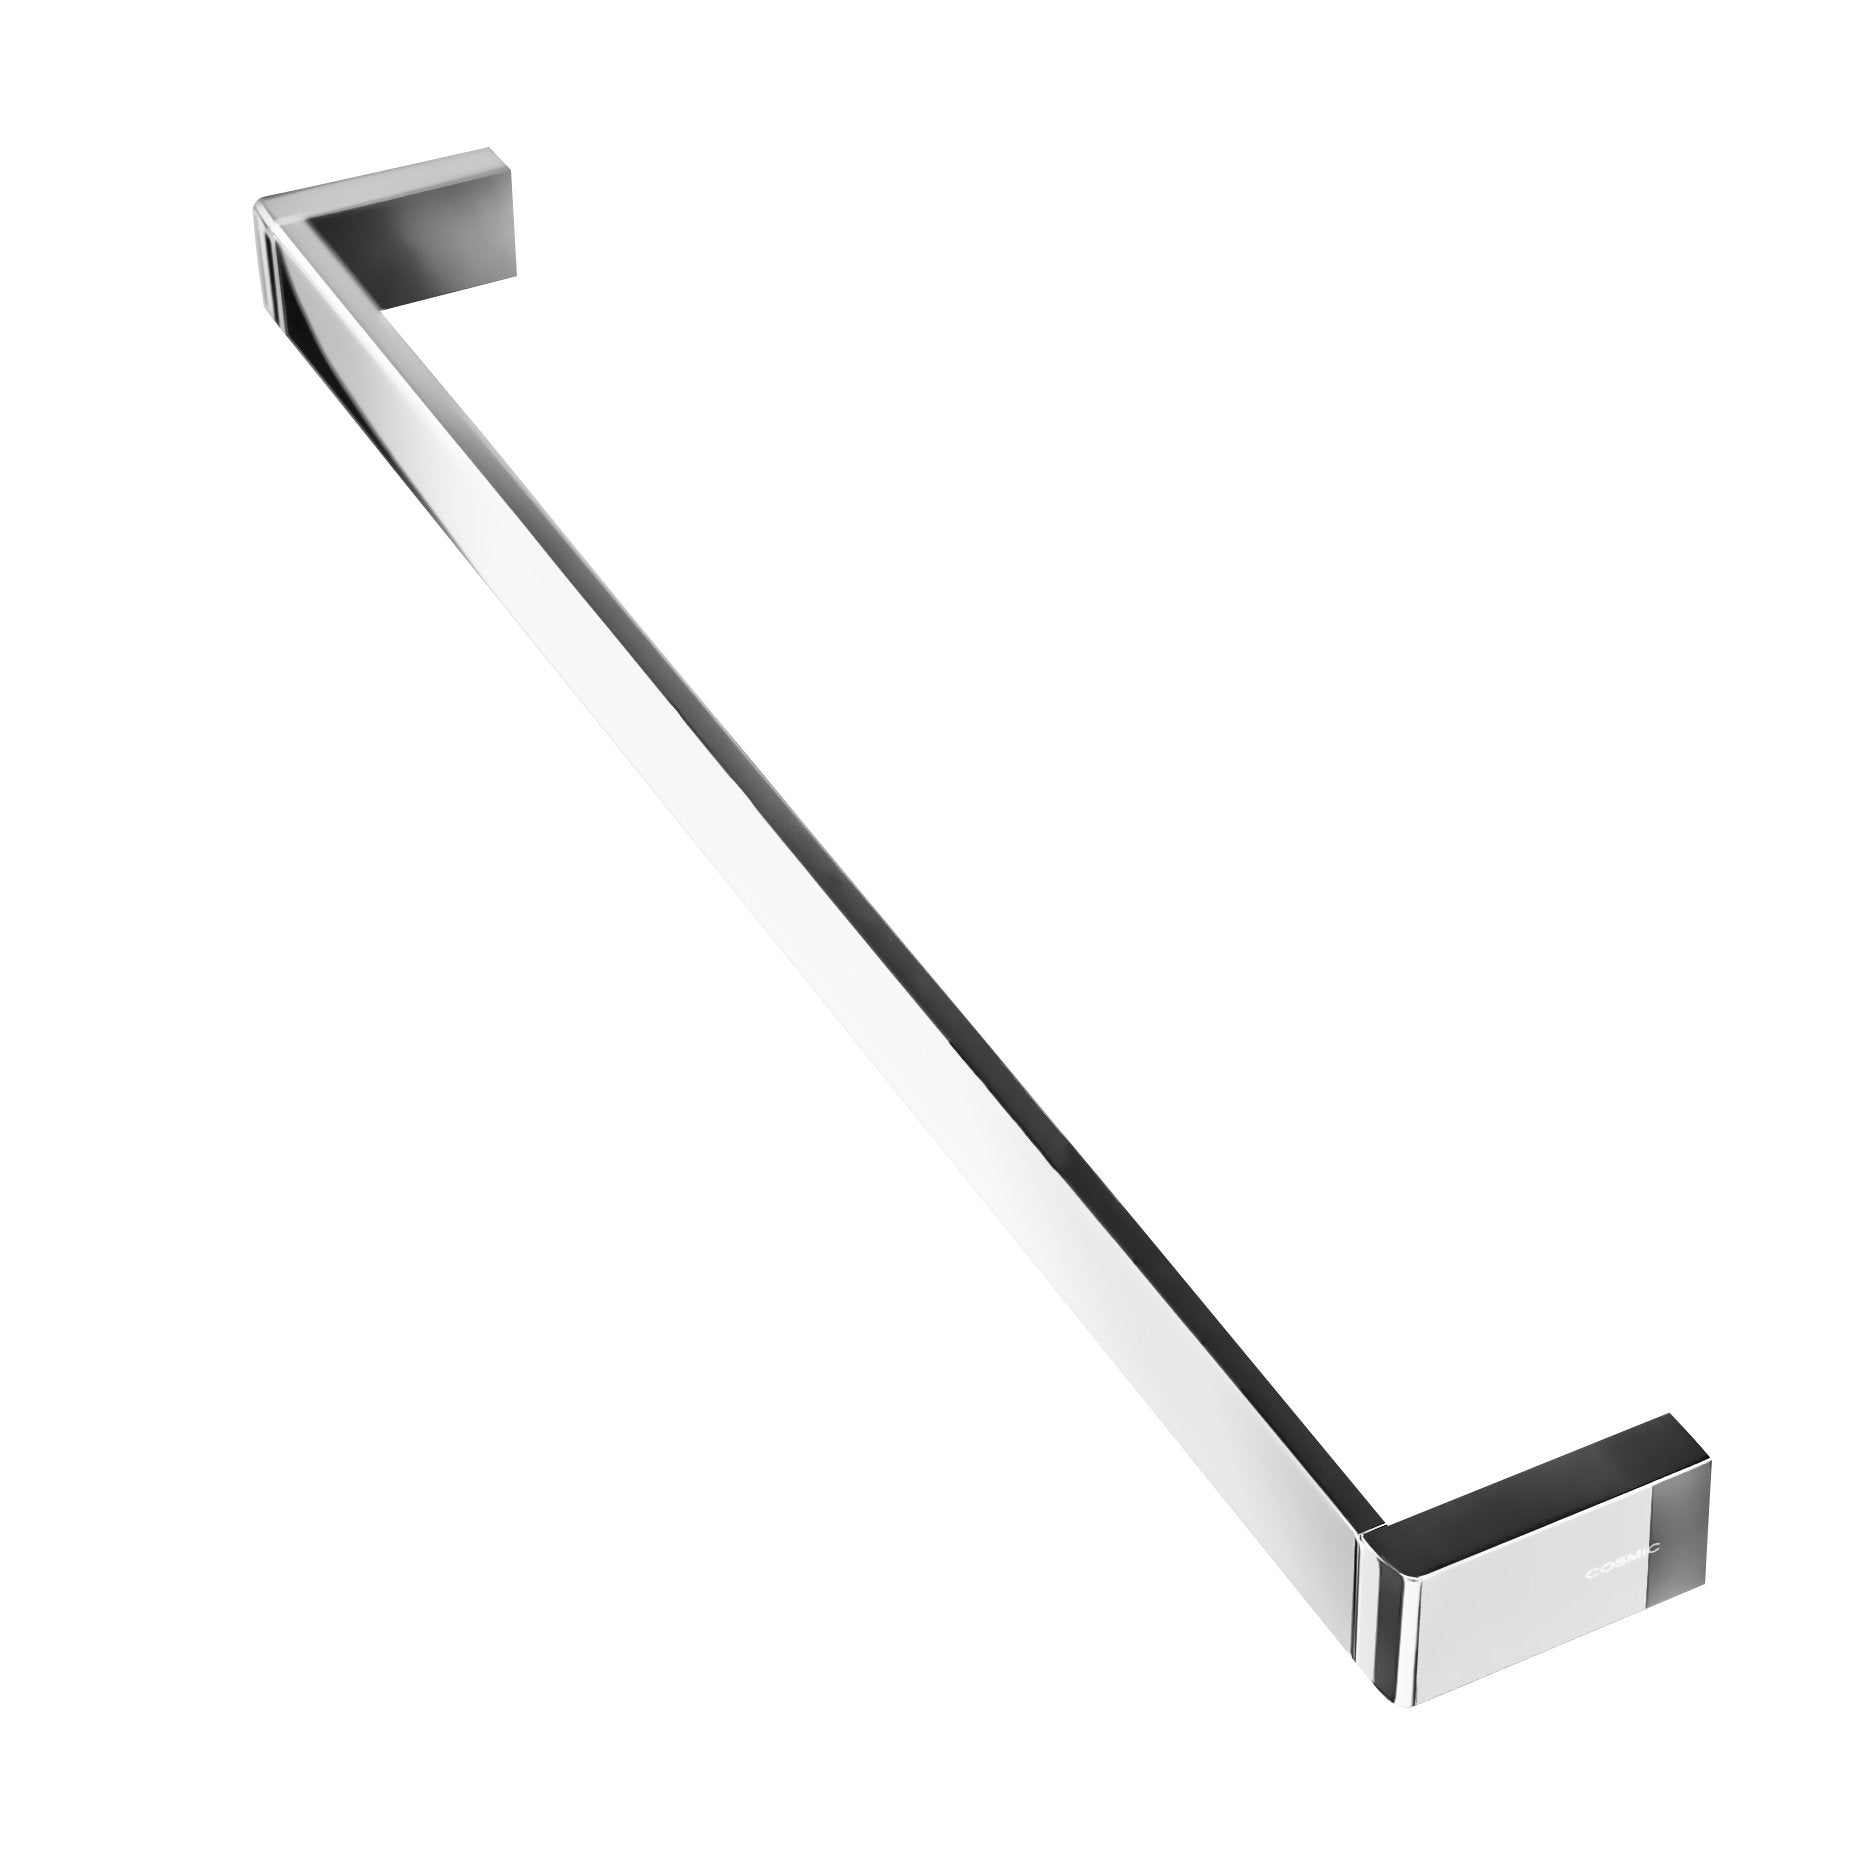 COSMIC Extreme Single Towel Bar, Wall Mount, Brass Body, Chrome Finish, 23-11/16 x 1-3/8 x 2-3/4 Inches (2530165)